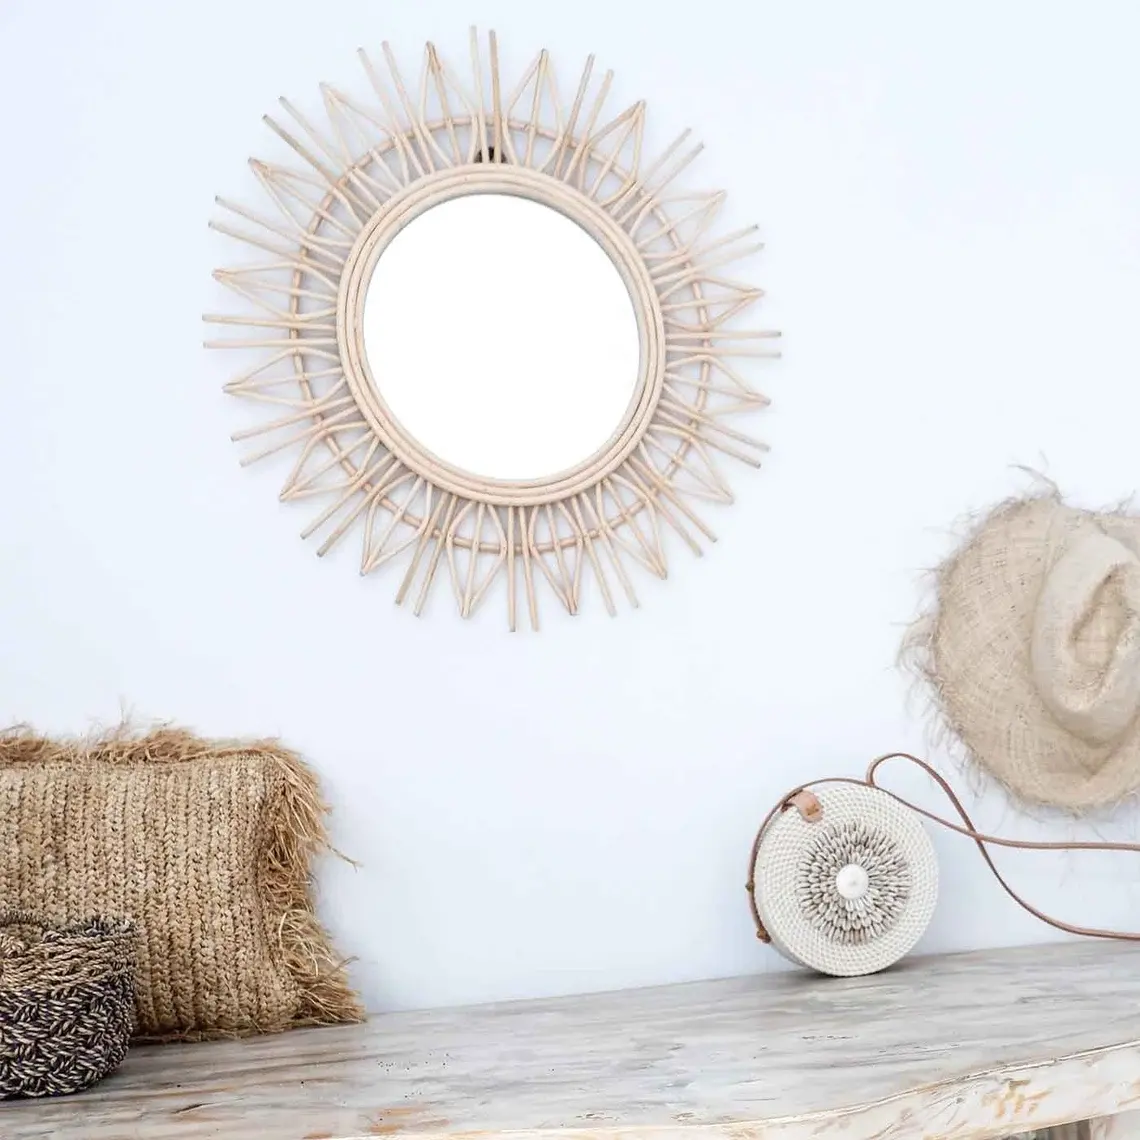 Style flower shaped rattan mirror vintage rattan mirror Round Rattan Mirror Wall Decoration High Quality From Vietnam